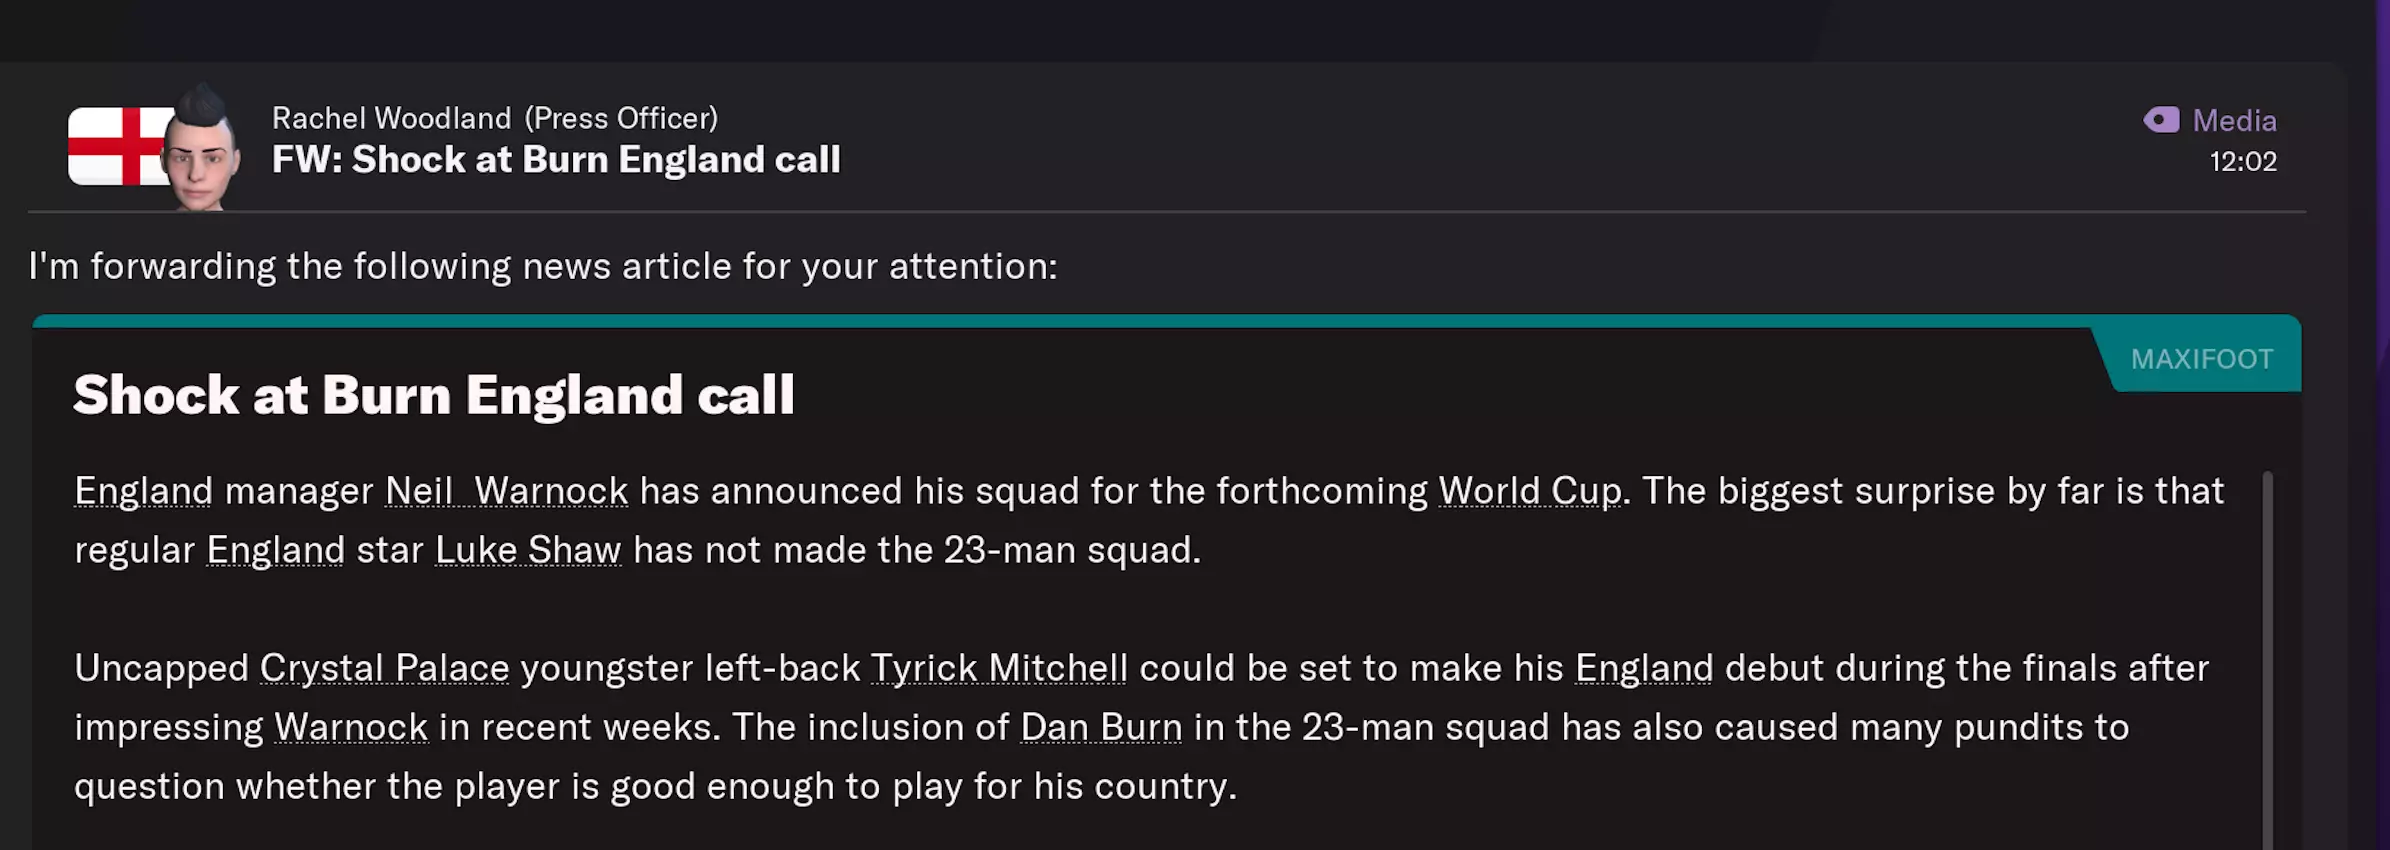 Image credit: Football Manager 2022